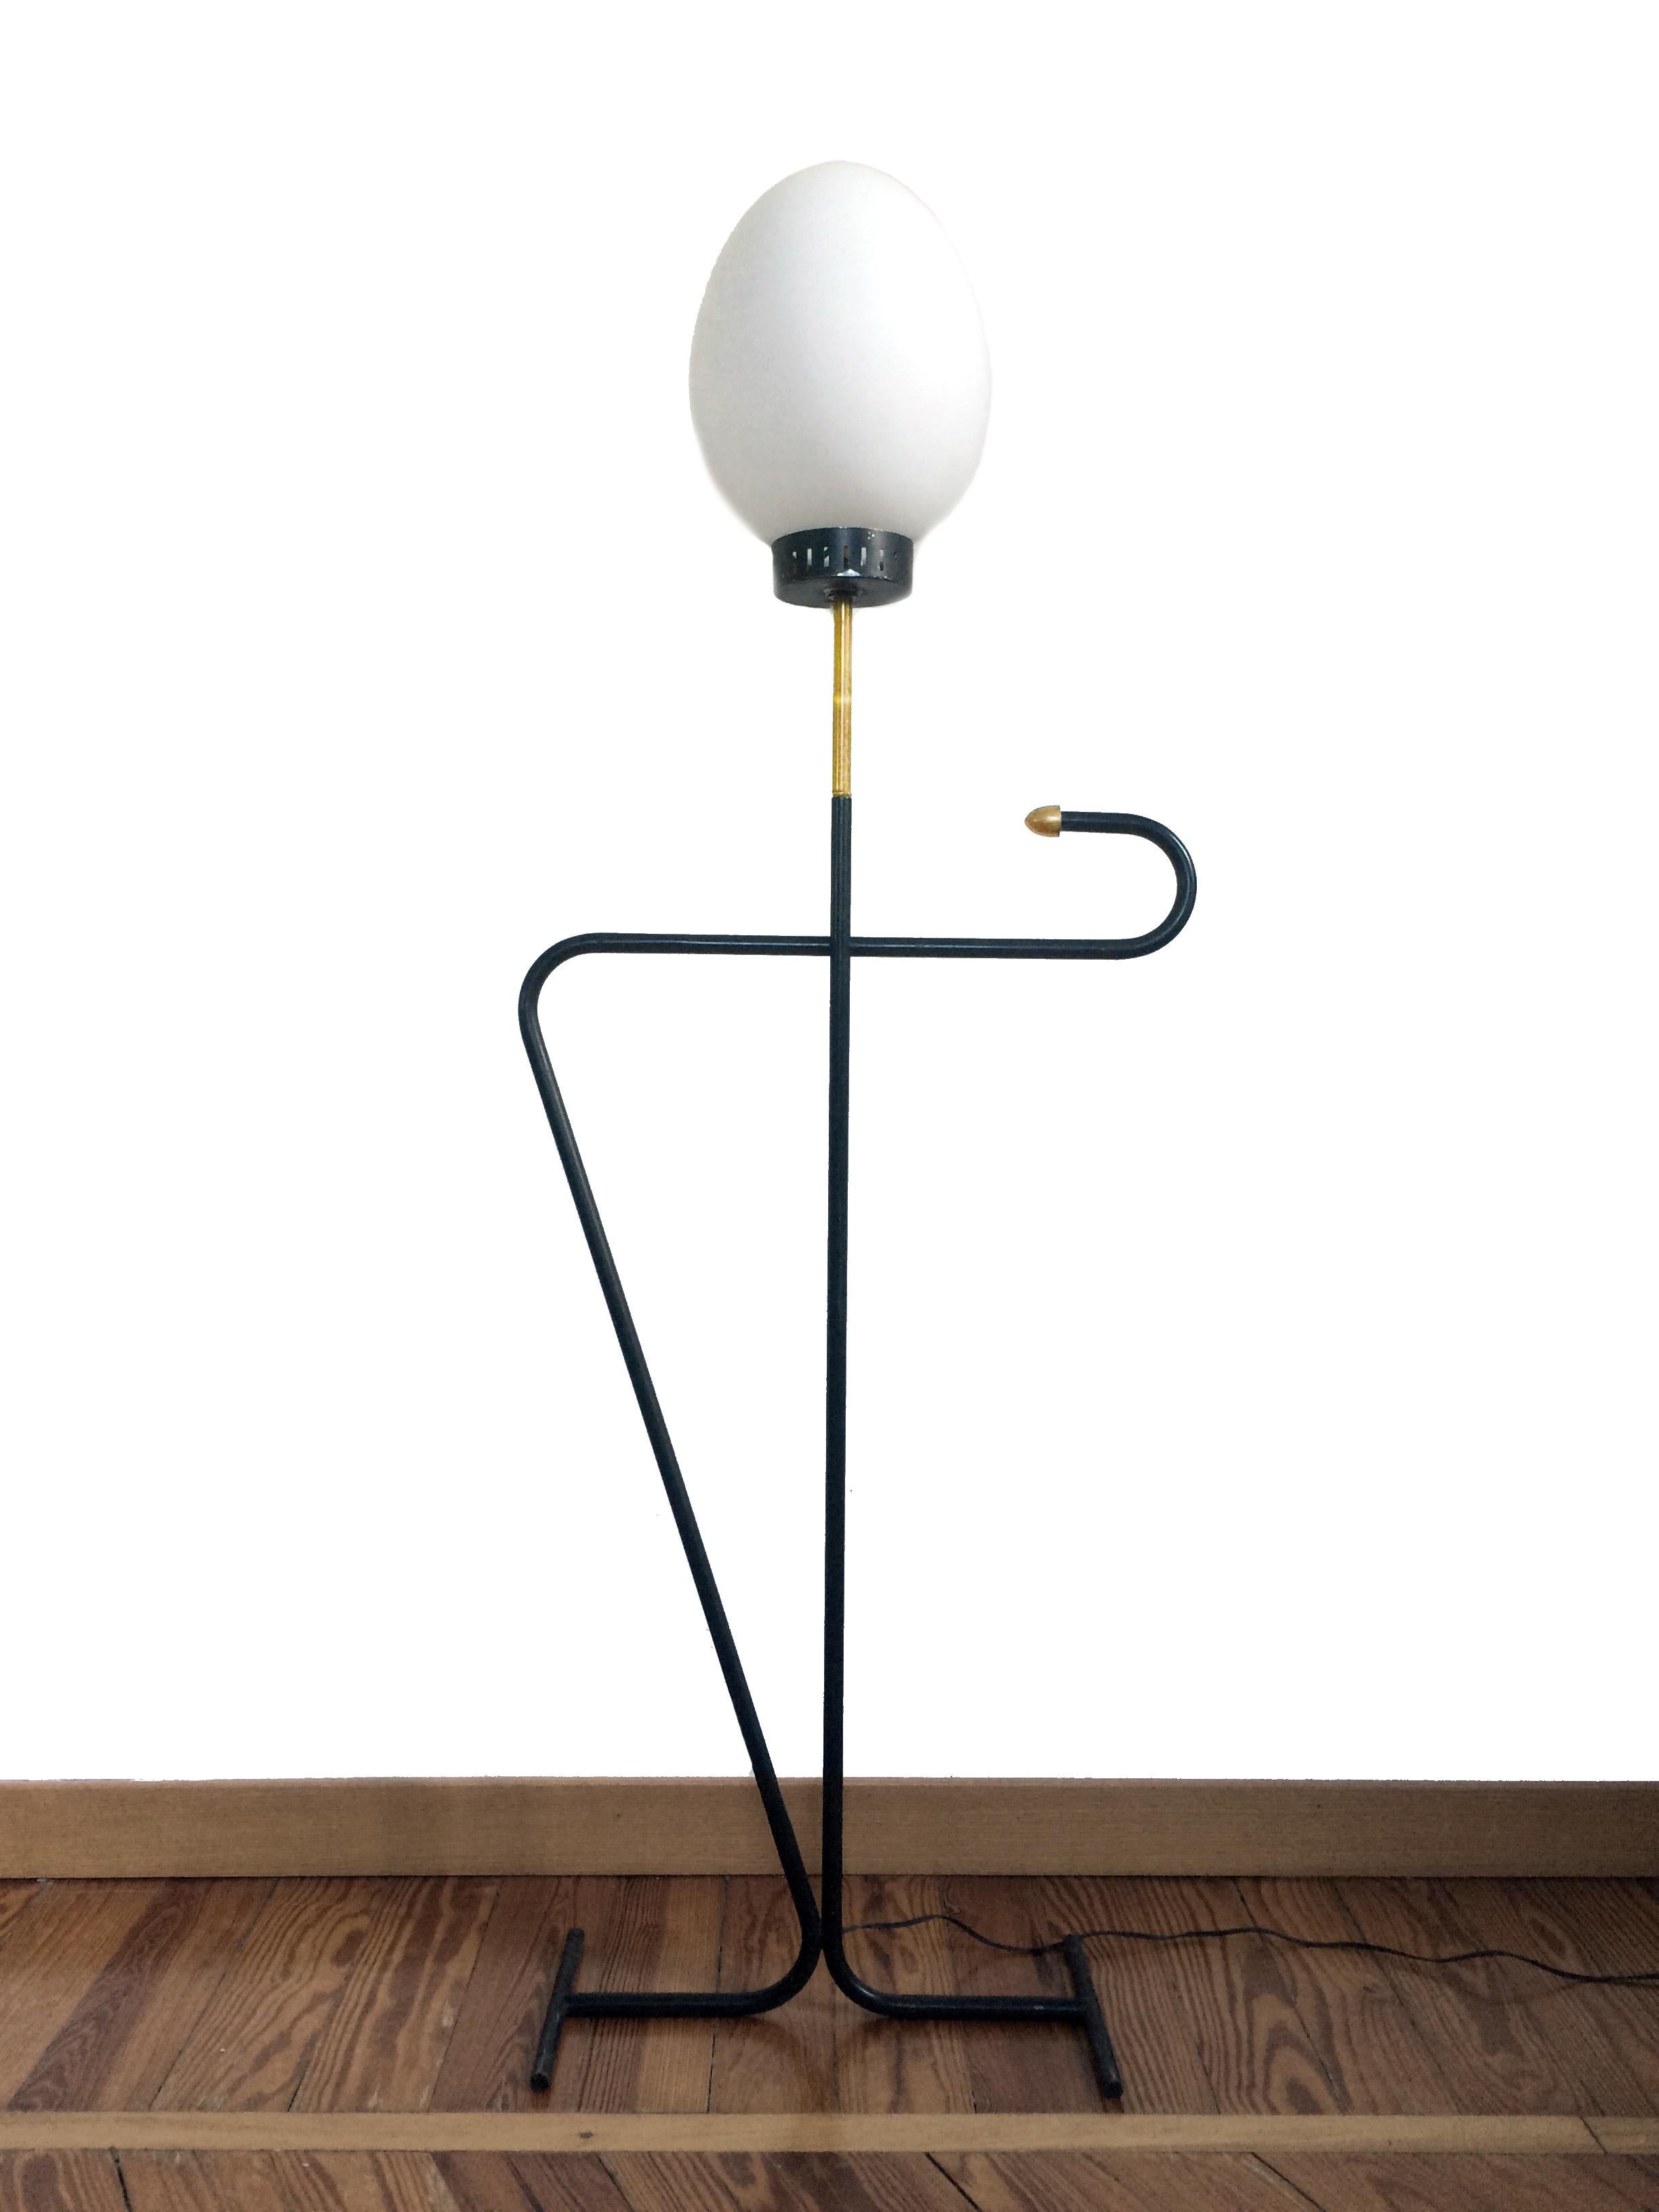 Particular Italian floor lamp from the 1950s, attributed to Stilnovo. Black lacquered metal frame, white opal glass 